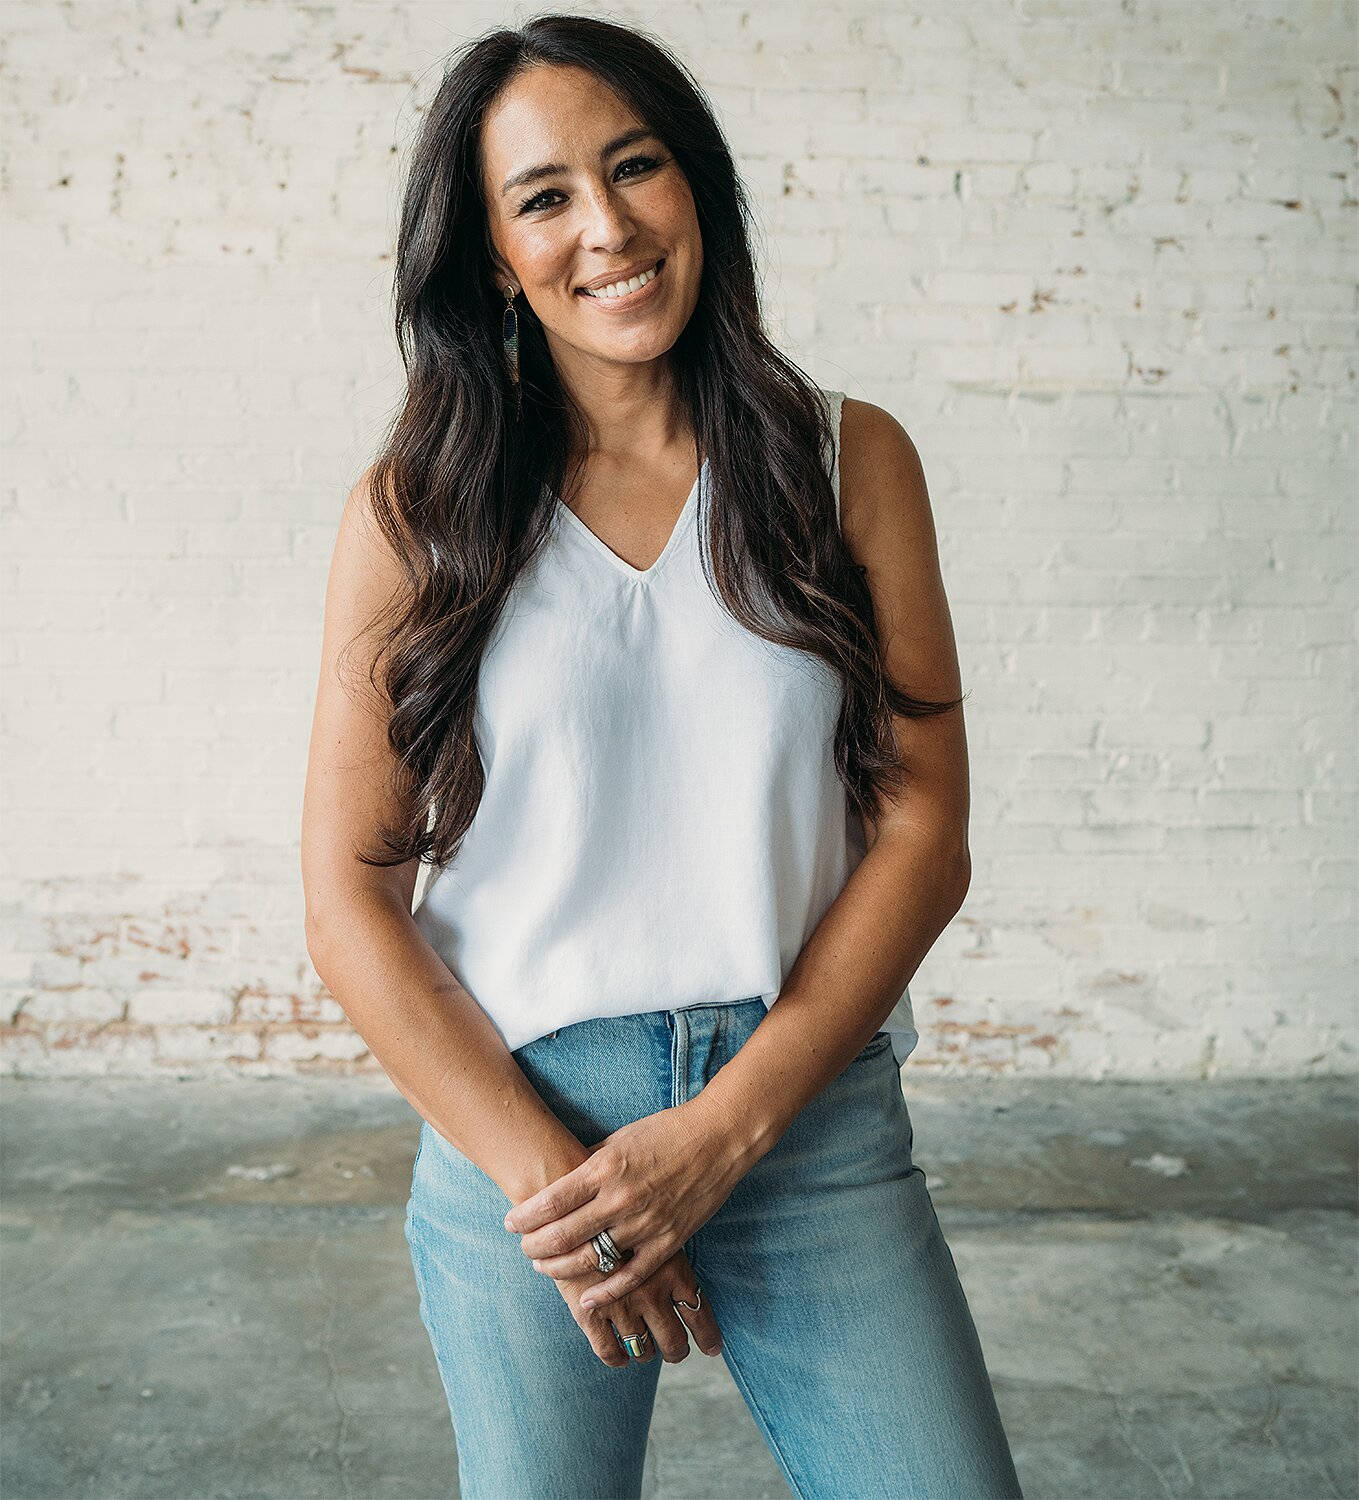 Joanna Gaines Simple Outfit Background